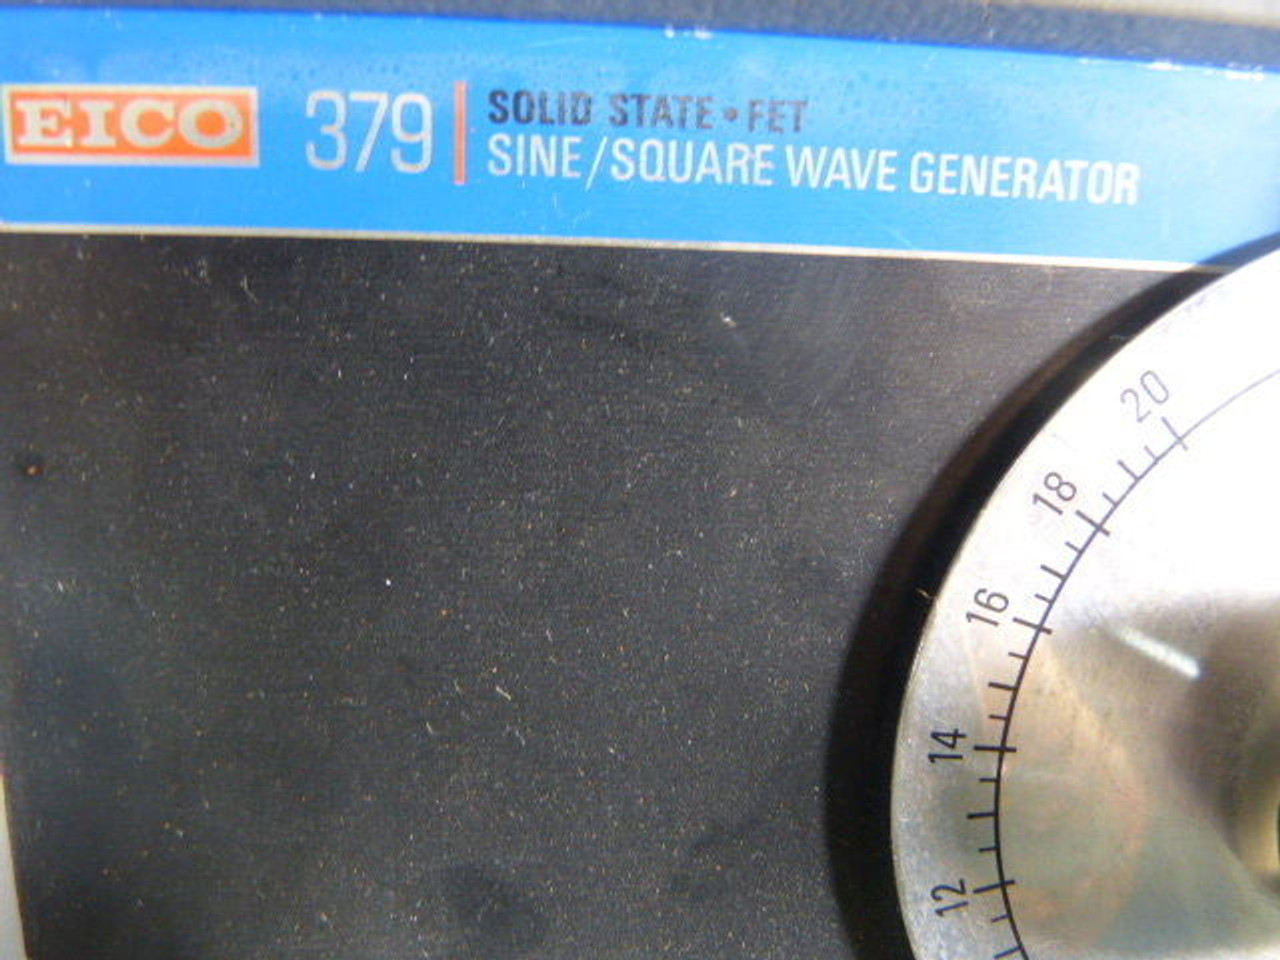 Eico 379 Solid State FET Sine Square Wave Generator USED